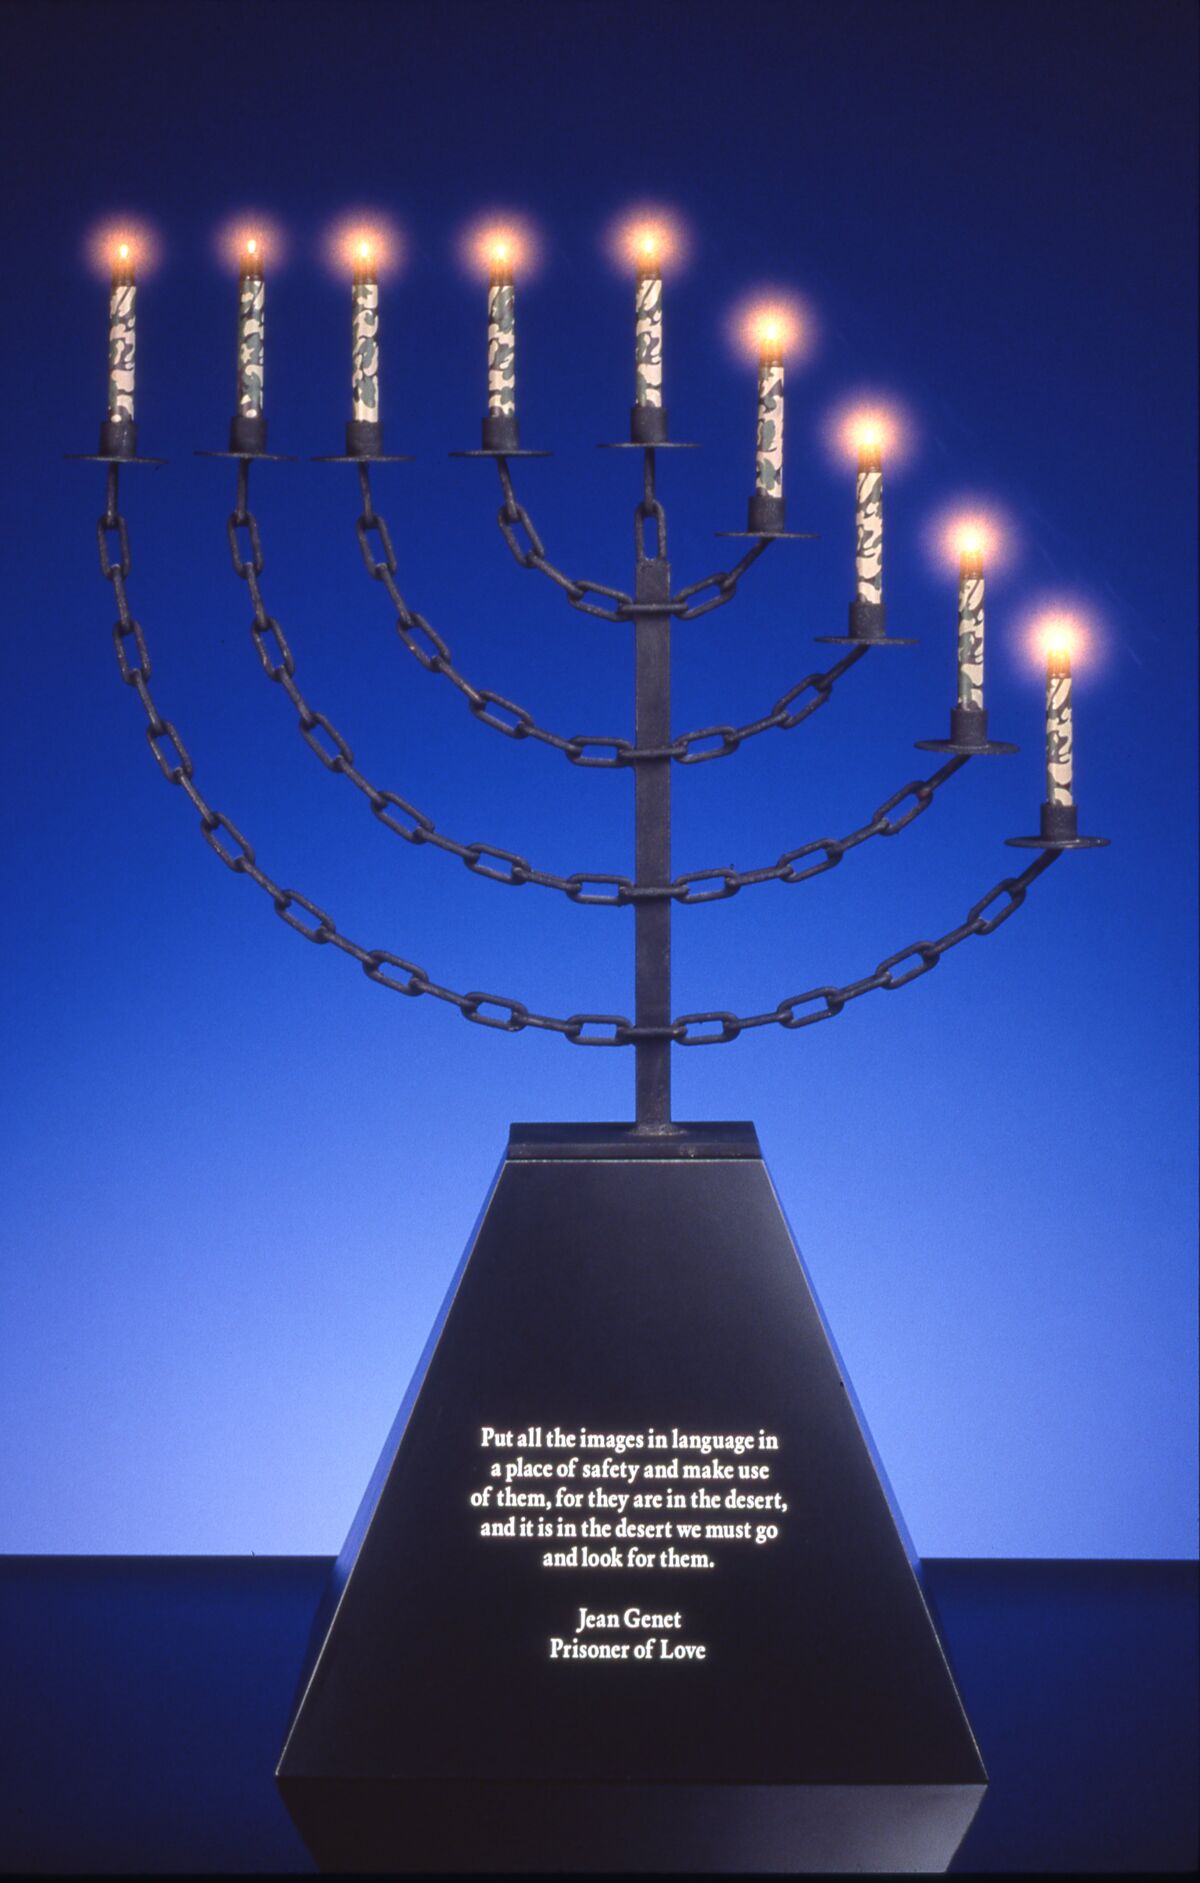 John Boskovich, “Bondage Menorah,” 1997. Metal, black formica base with Jean Genet text, U.S. issue camouflage Mini-Maglites, 41.5 inches by 30 inches by 16.5 inches